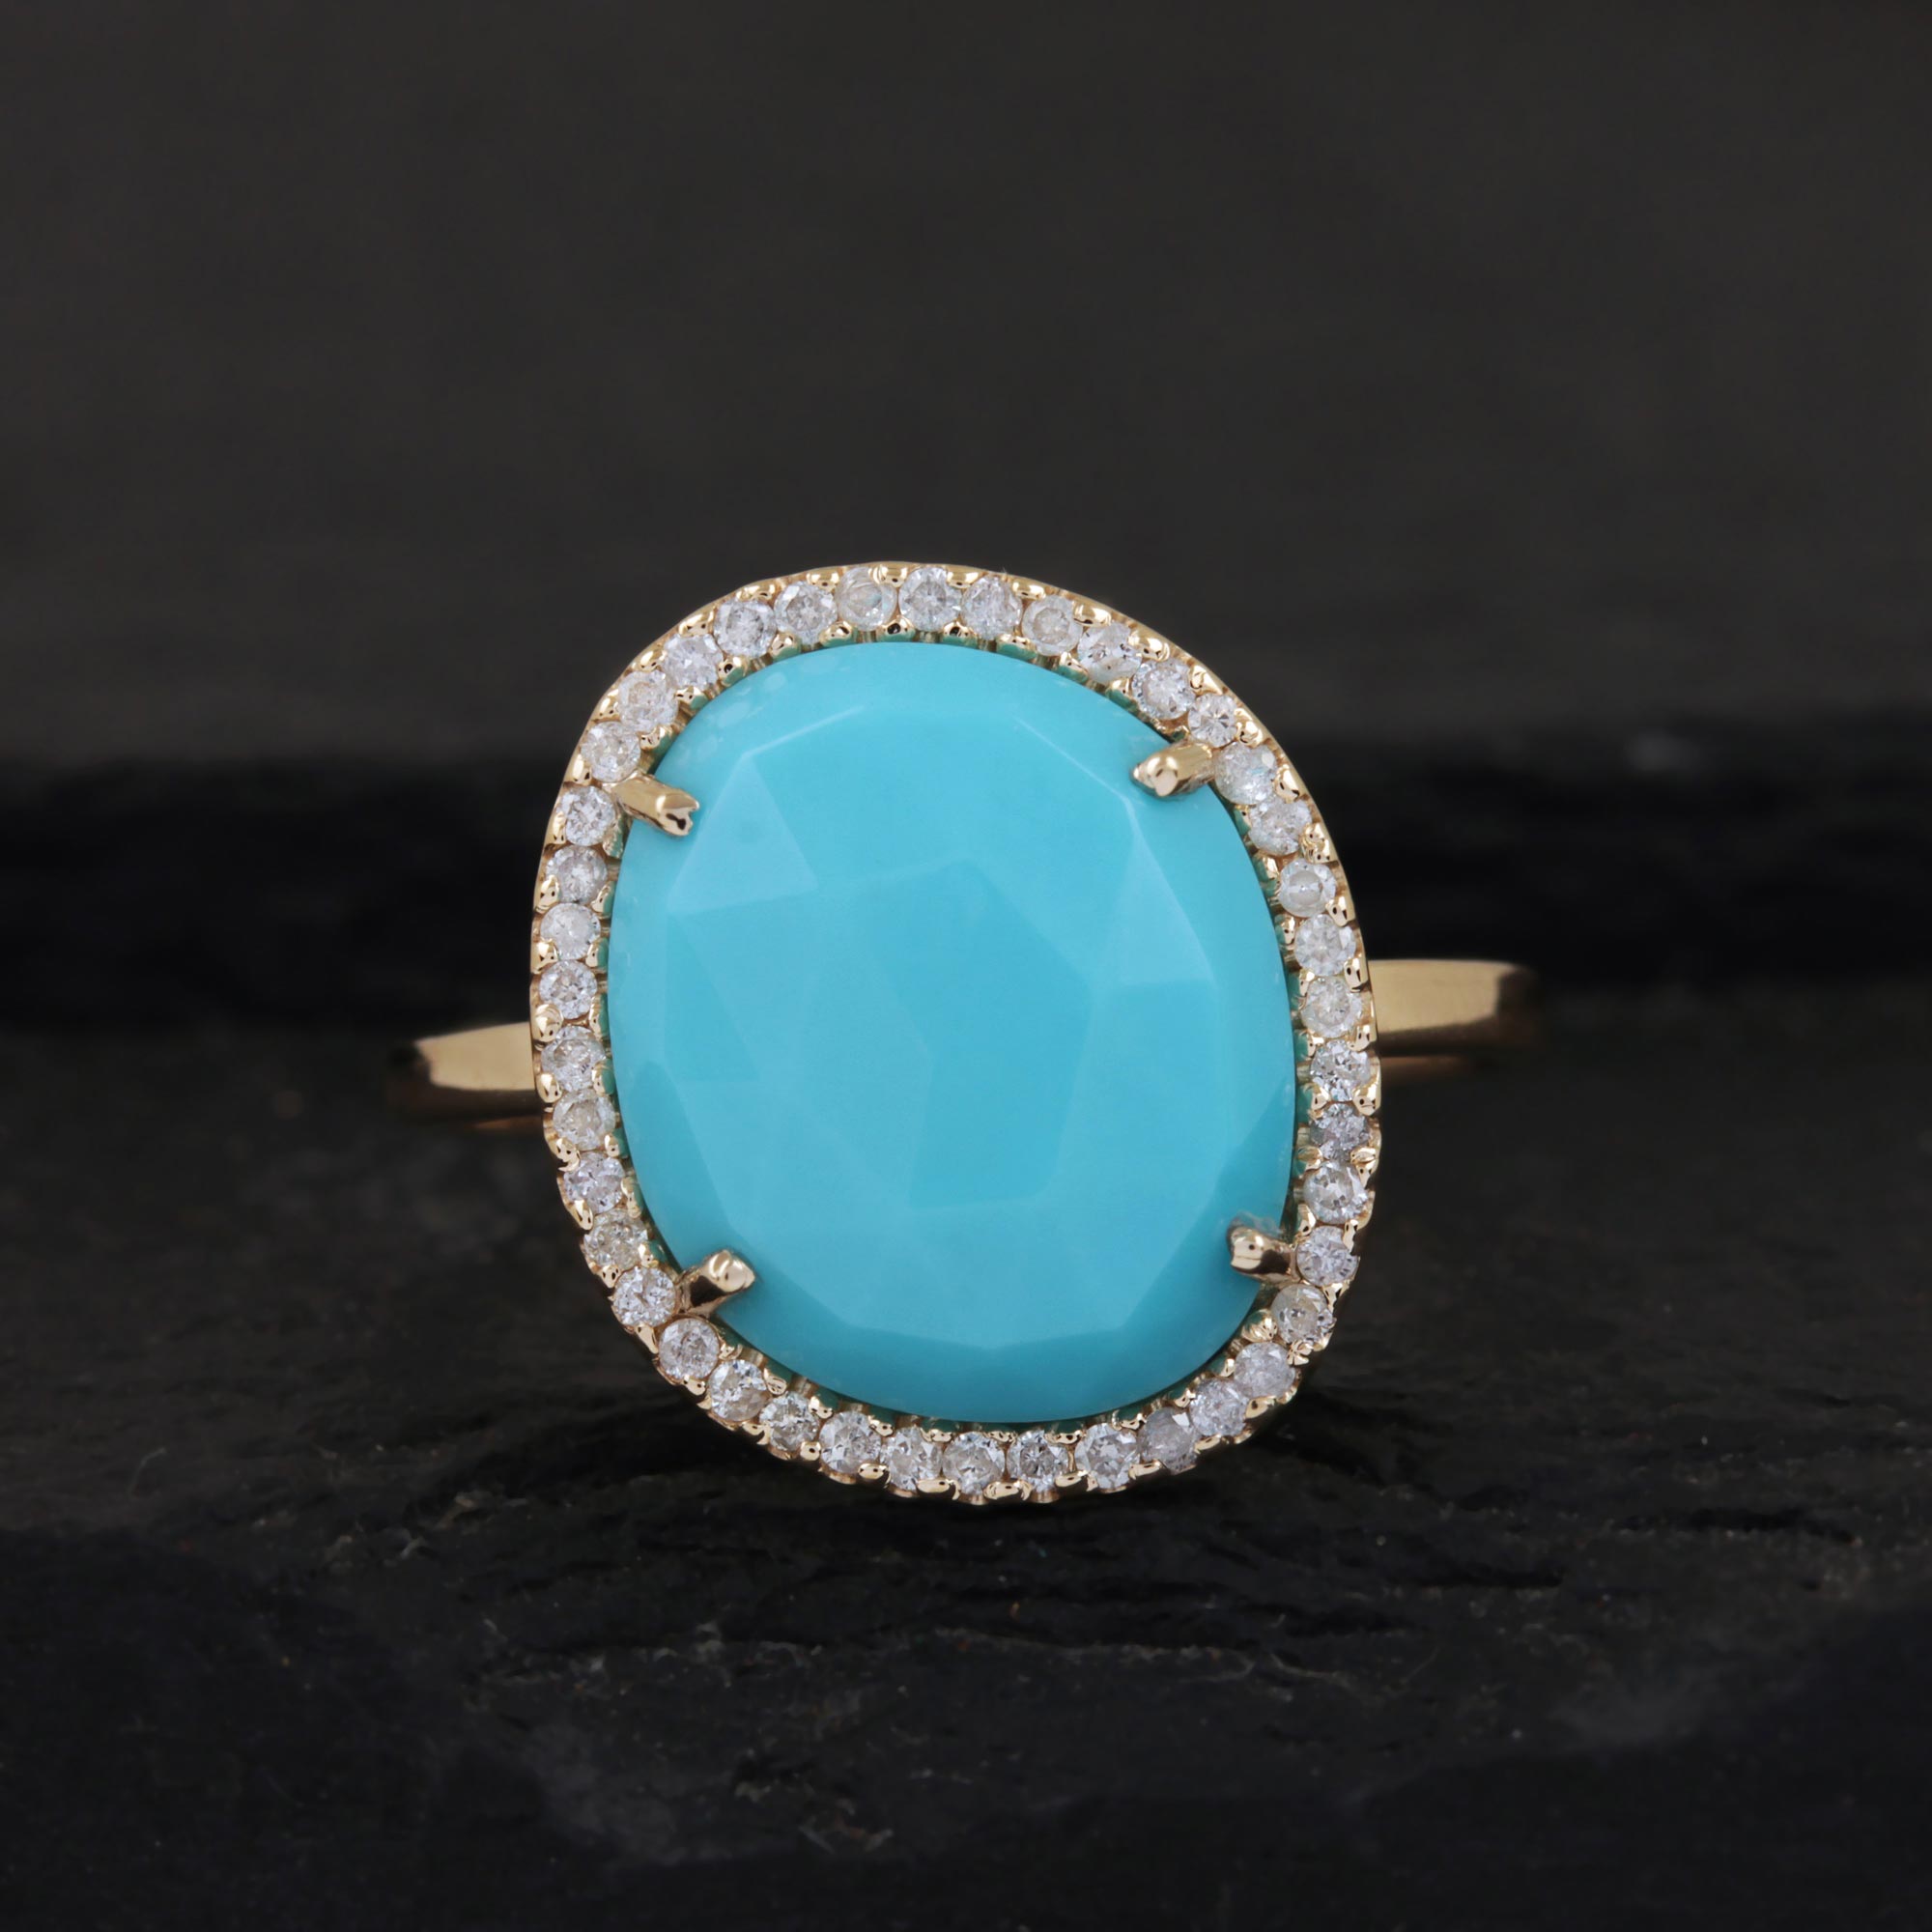 Turquoise Gemstone 14K Solid Gold Ring Pave Diamond Jewelry